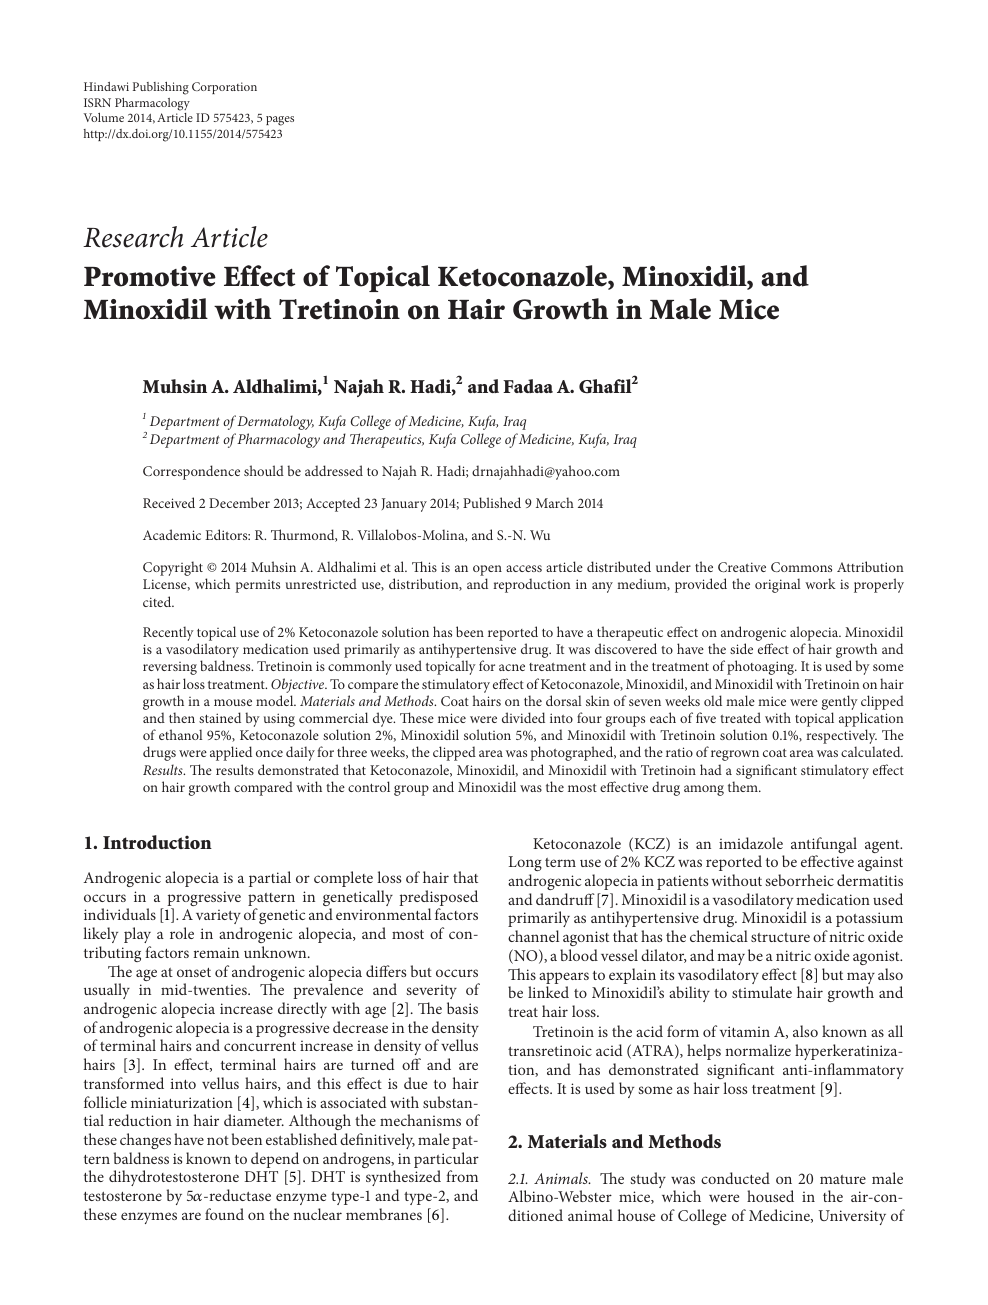 Promotive Effect of Topical Ketoconazole, Minoxidil, and Minoxidil with  Tretinoin on Hair Growth in Male Mice – topic of research paper in Clinical  medicine. Download scholarly article PDF and read for free